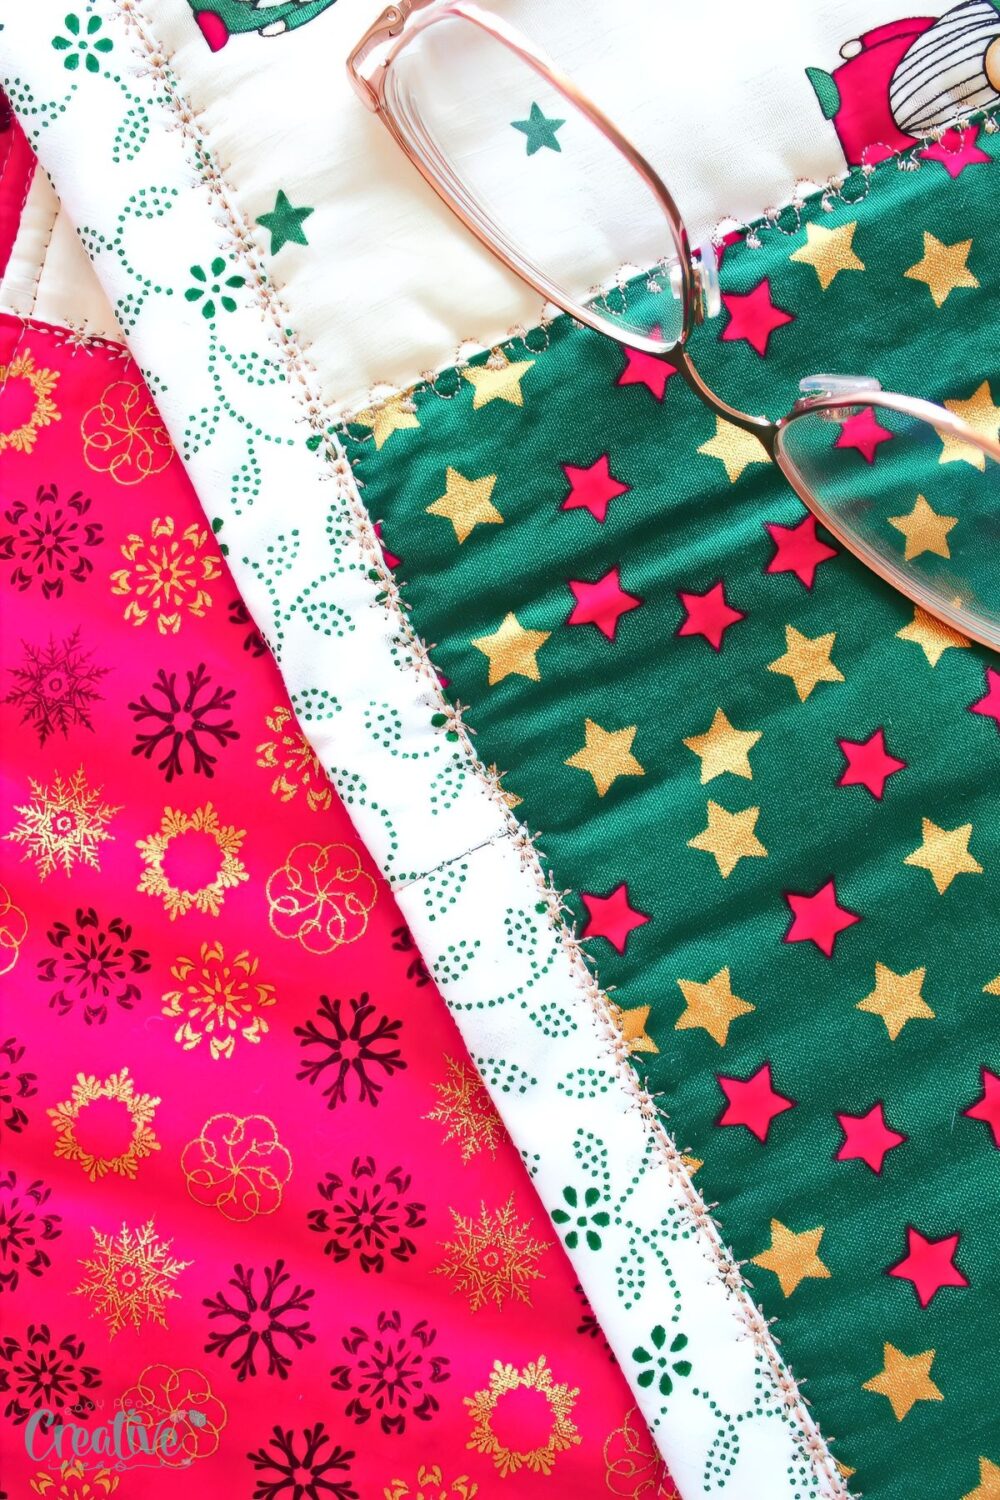 Master the art of finishing edges beautifully with this step-by-step guide on how to sew bias binding together.